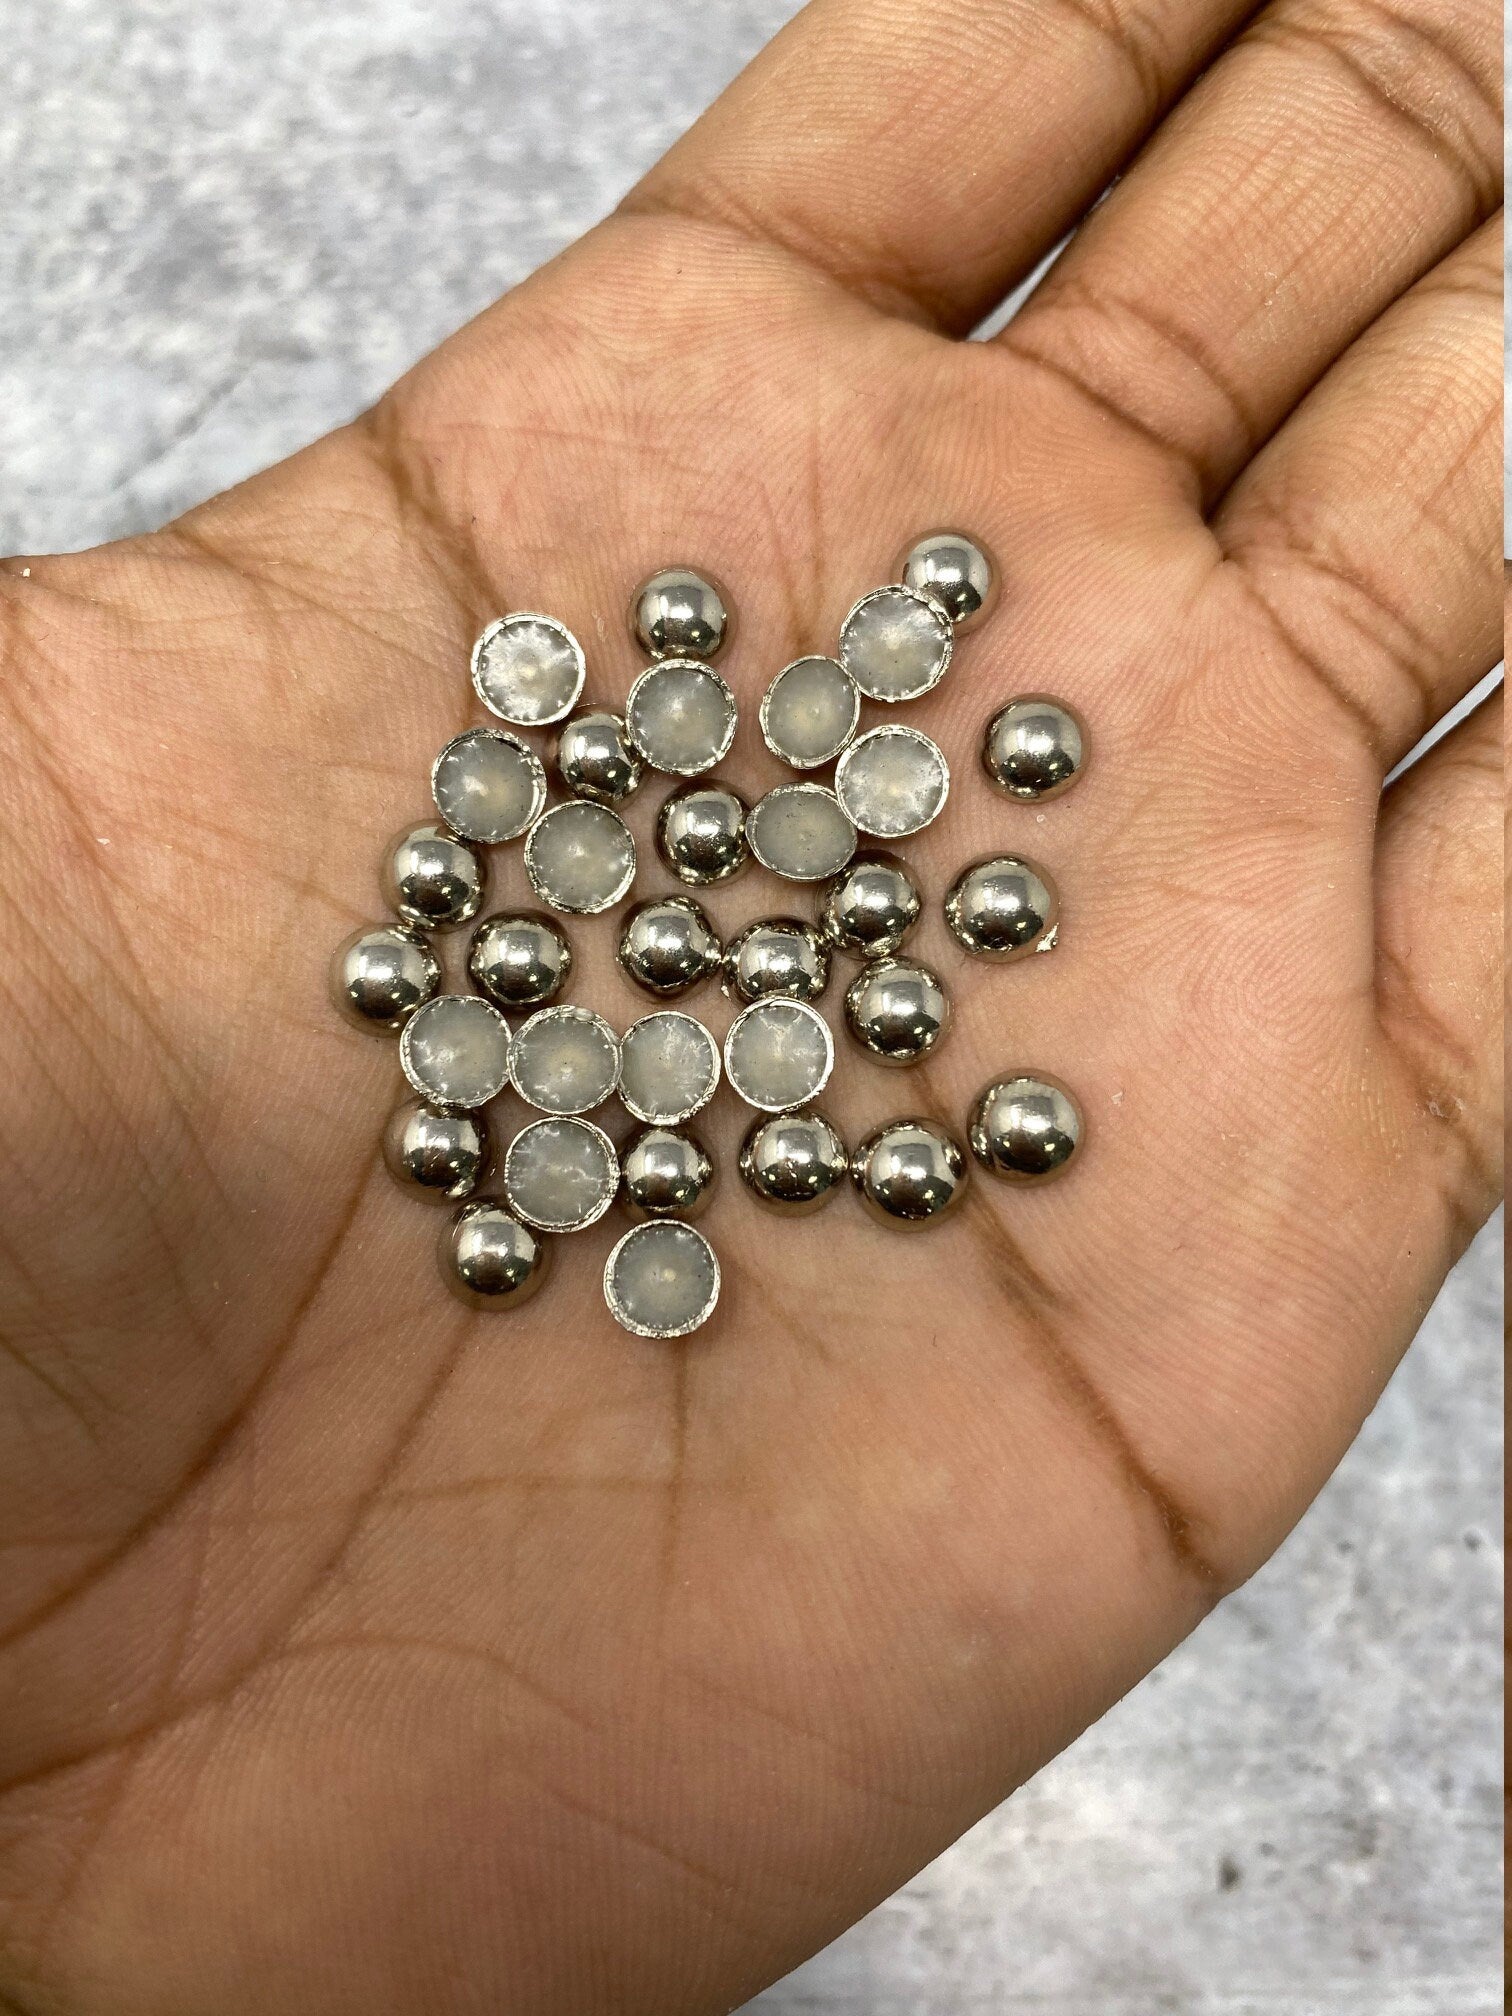 NEW, Hotfix Dome Studs, 100 Pcs, 7mm (Medium) SILVER, Great for Denim, Sweaters, Camo Jackets, Belts, Bags, Shoes, Crafts,+ MORE!